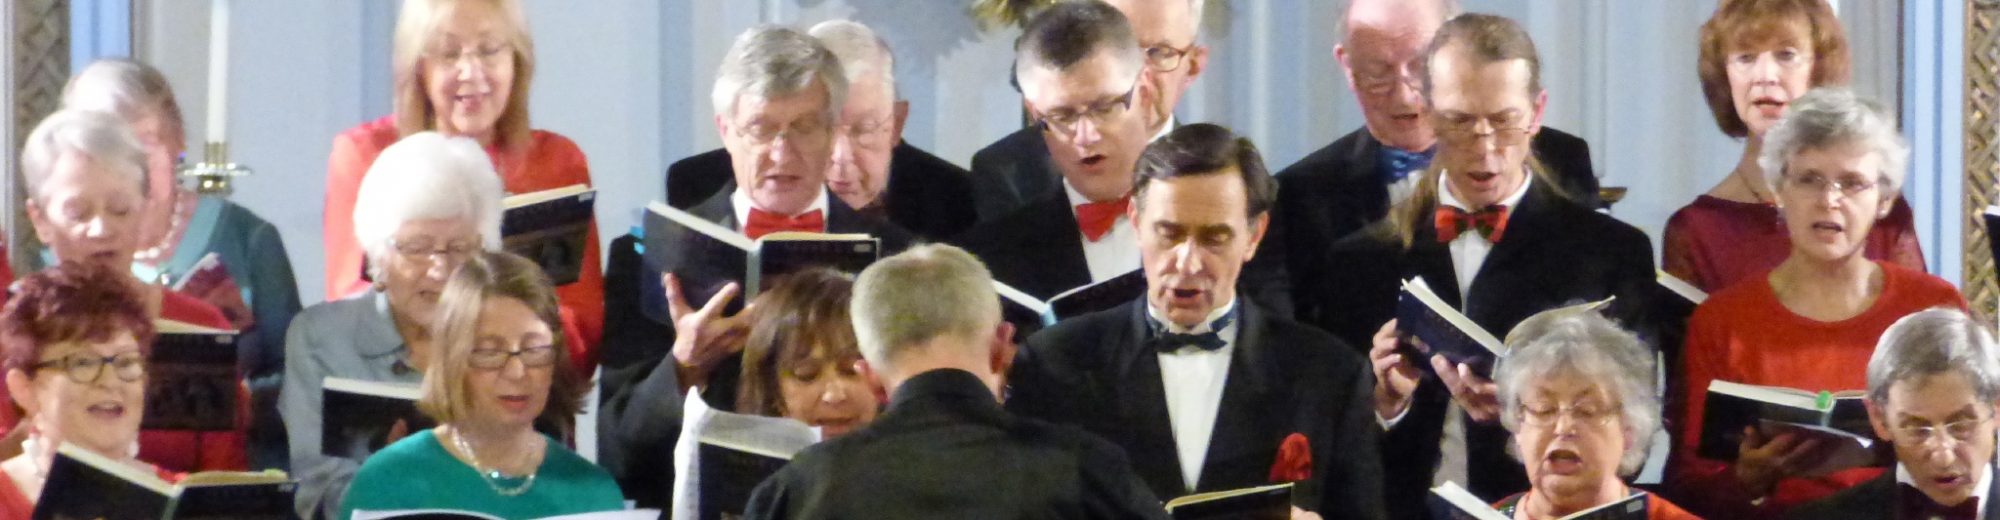 Stanmore Choral Society